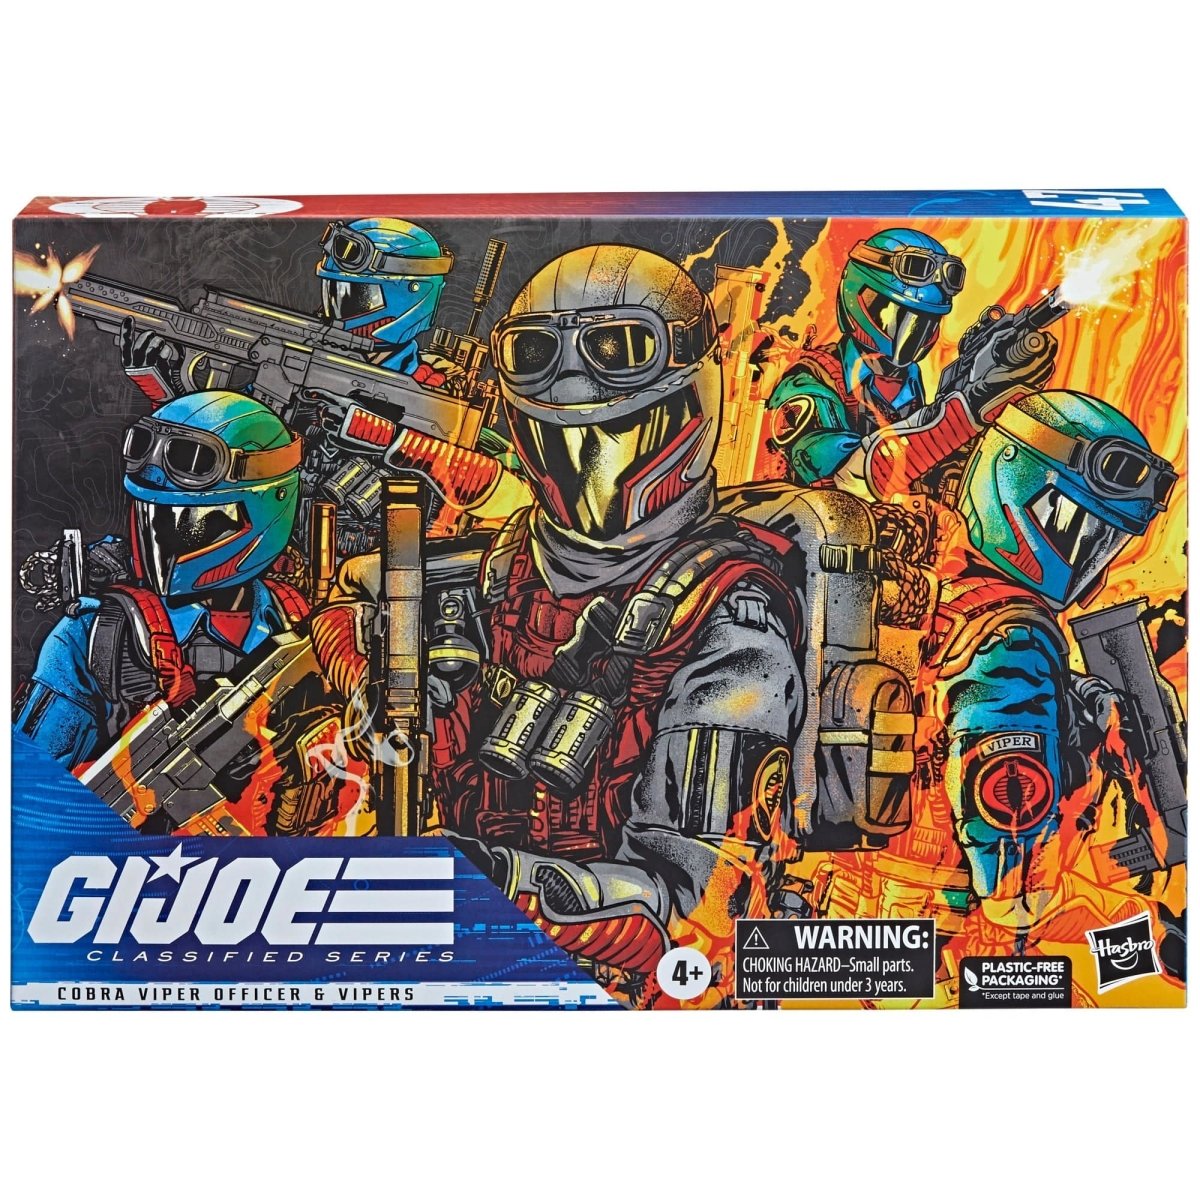 G.I. Joe Classified Series Cobra Viper Officer & Vipers Action Figures Pop-O-Loco